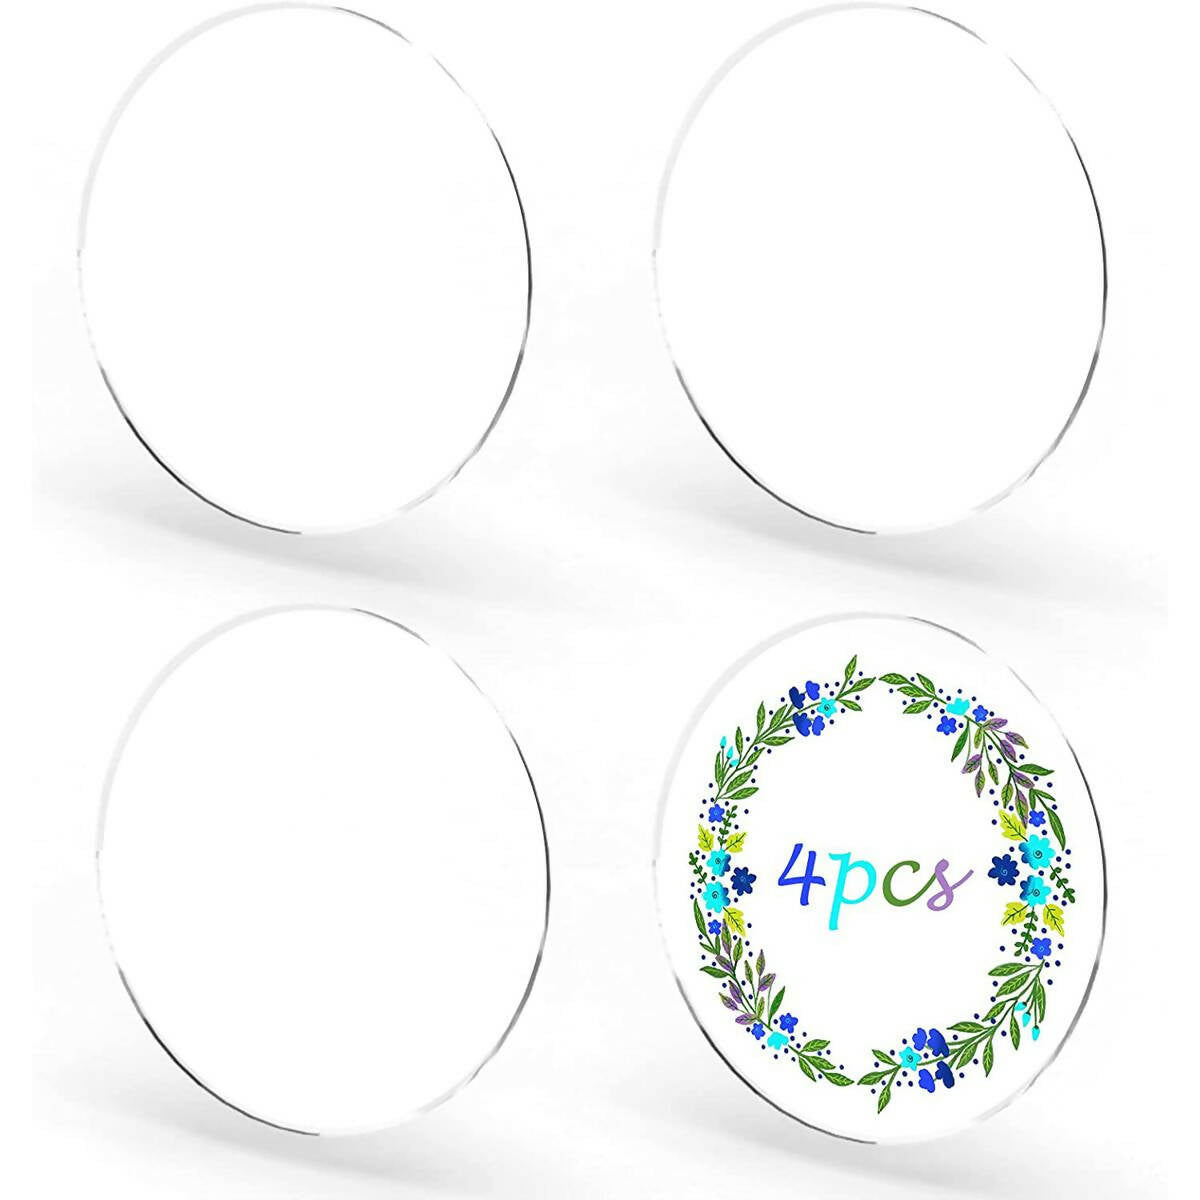 Clear Acrylic Sheet, 4 Pieces Round Acrylic Sheet 8 Inch Circle Acrylic Blanks Plastic Disc Transparent Acrylic Panel Circle Acrylic Sheets 2mm Thickness Sign for Picture Frame Painting/Calligraphy/ Glass Painting DIY Crafts